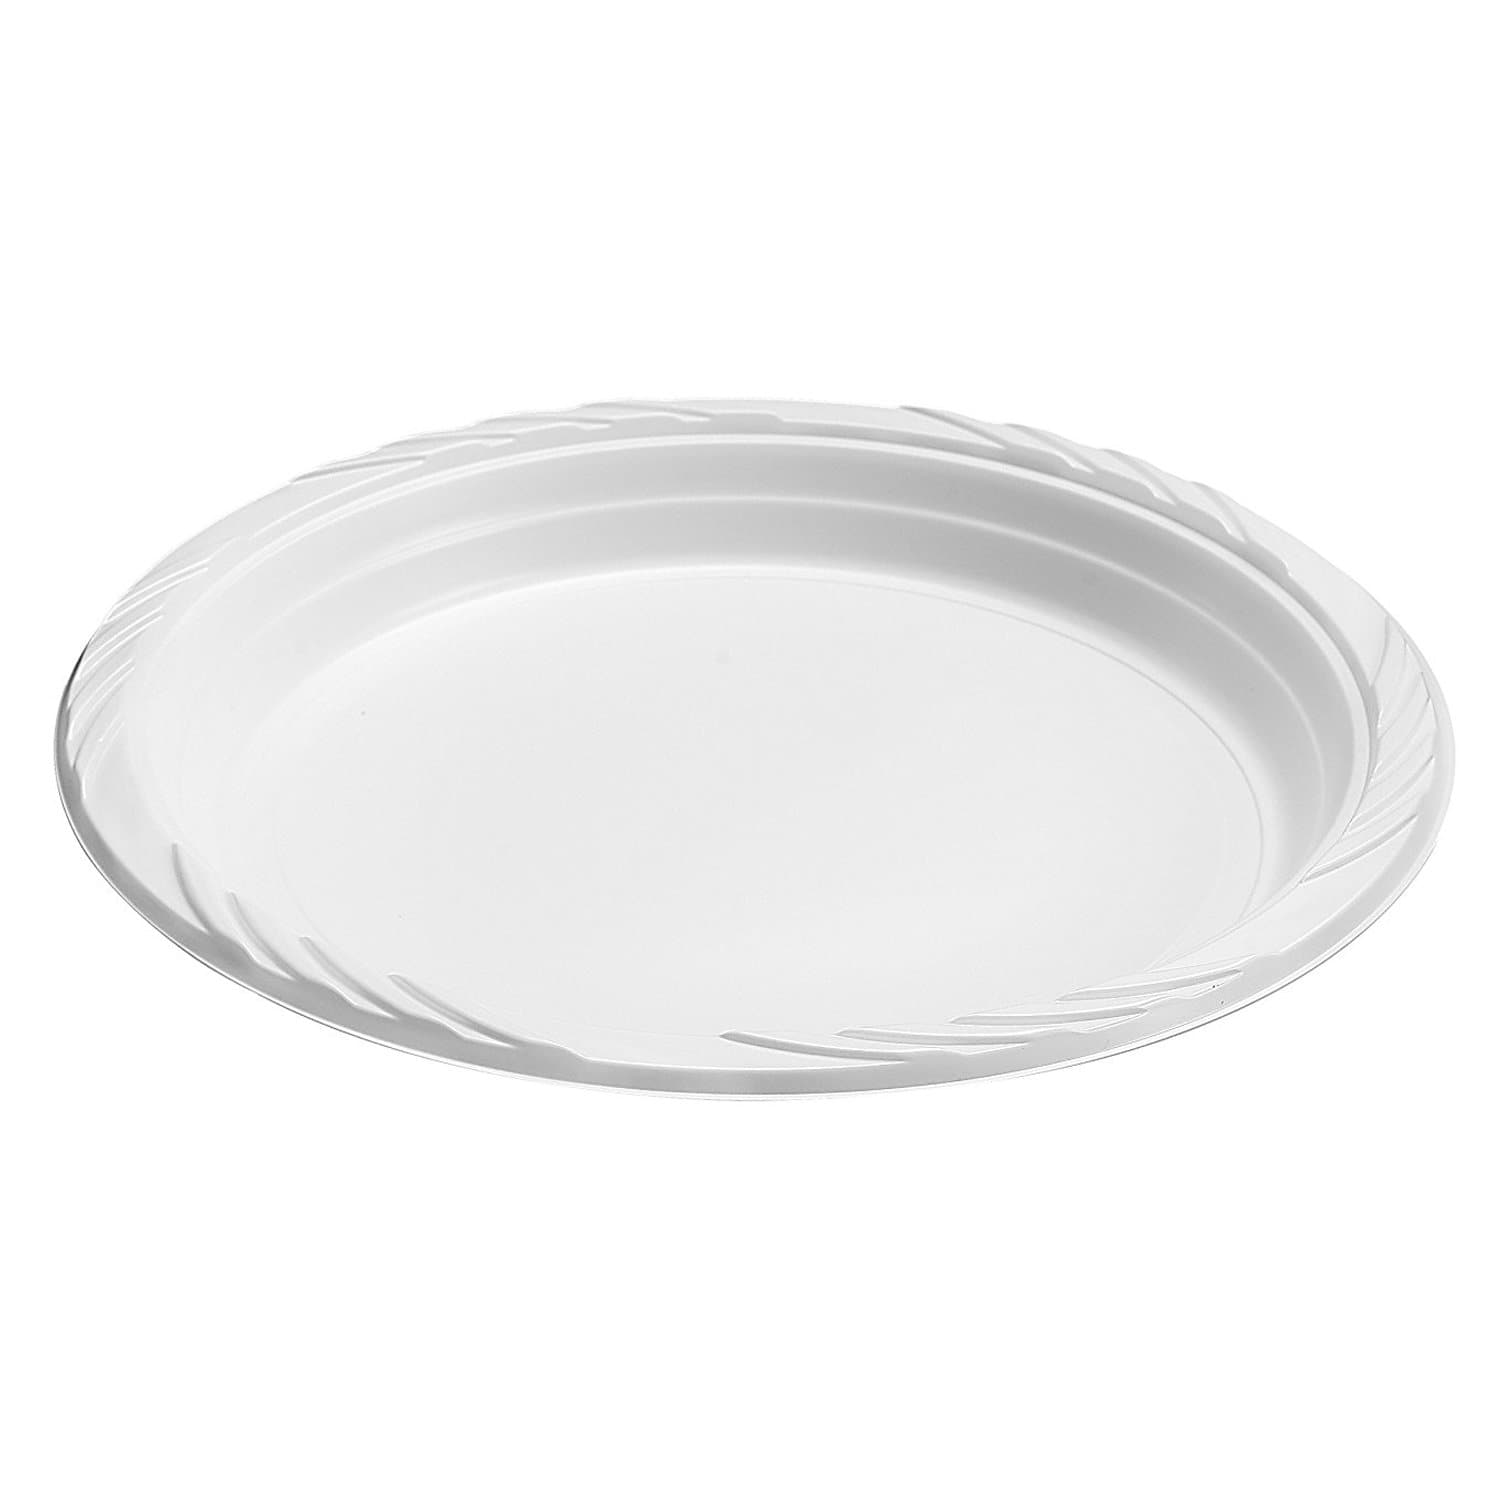 Case of Plastic - 7" - Disposable - Lightweight - White - Dinner Plates | 800 ct.  Blue Sky   